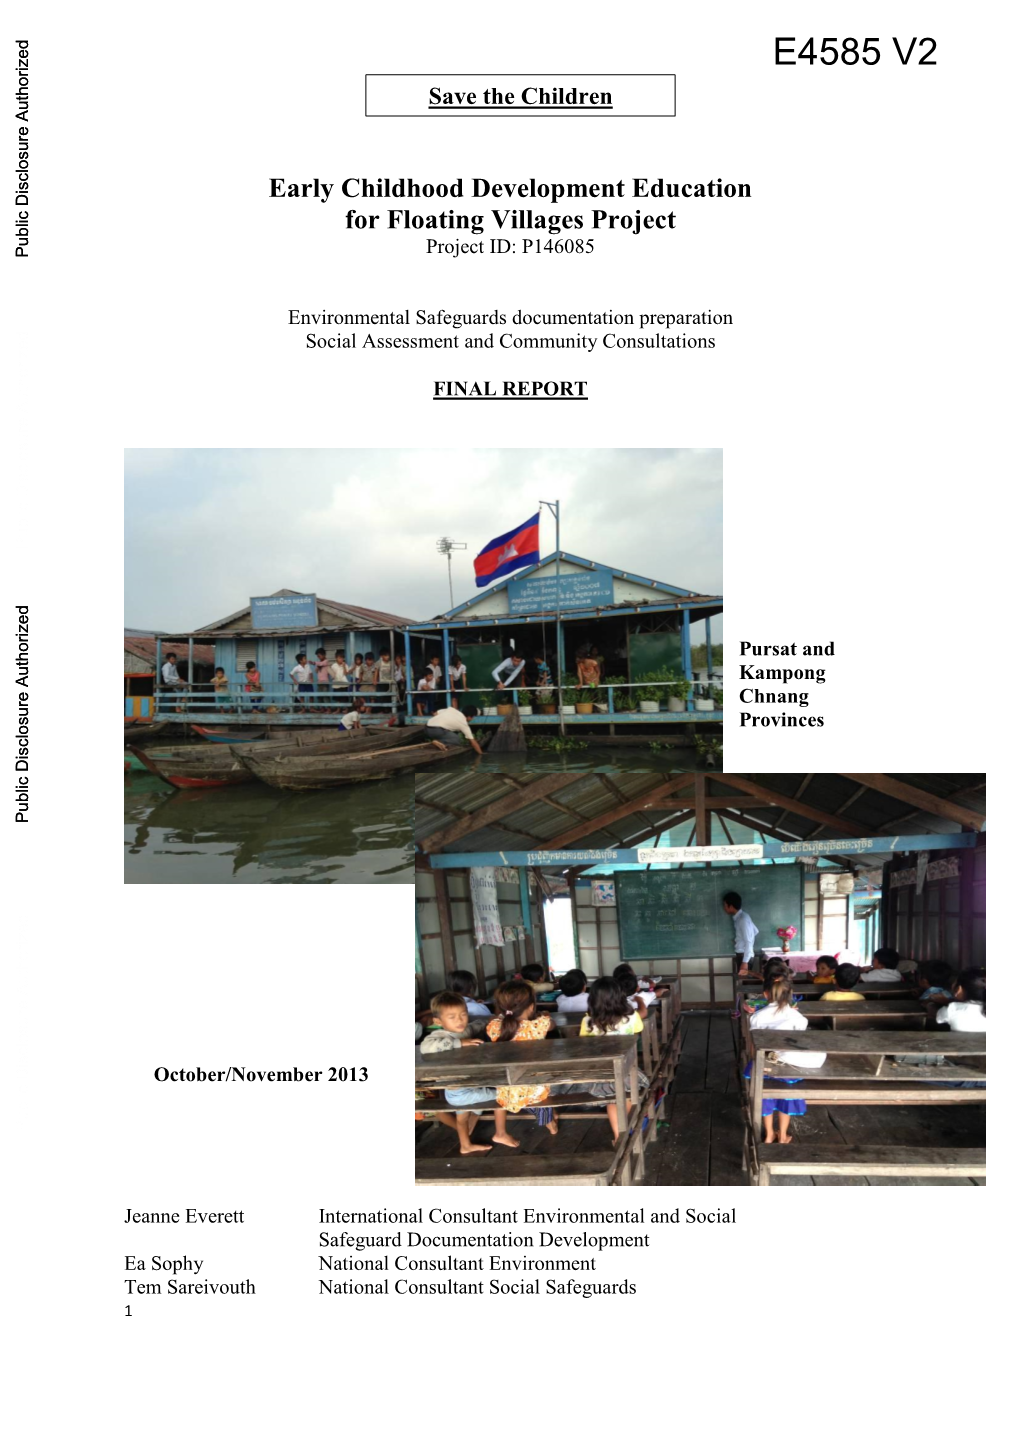 Early Childhood Development Education for Floating Villages Project Project ID: P146085 Public Disclosure Authorized